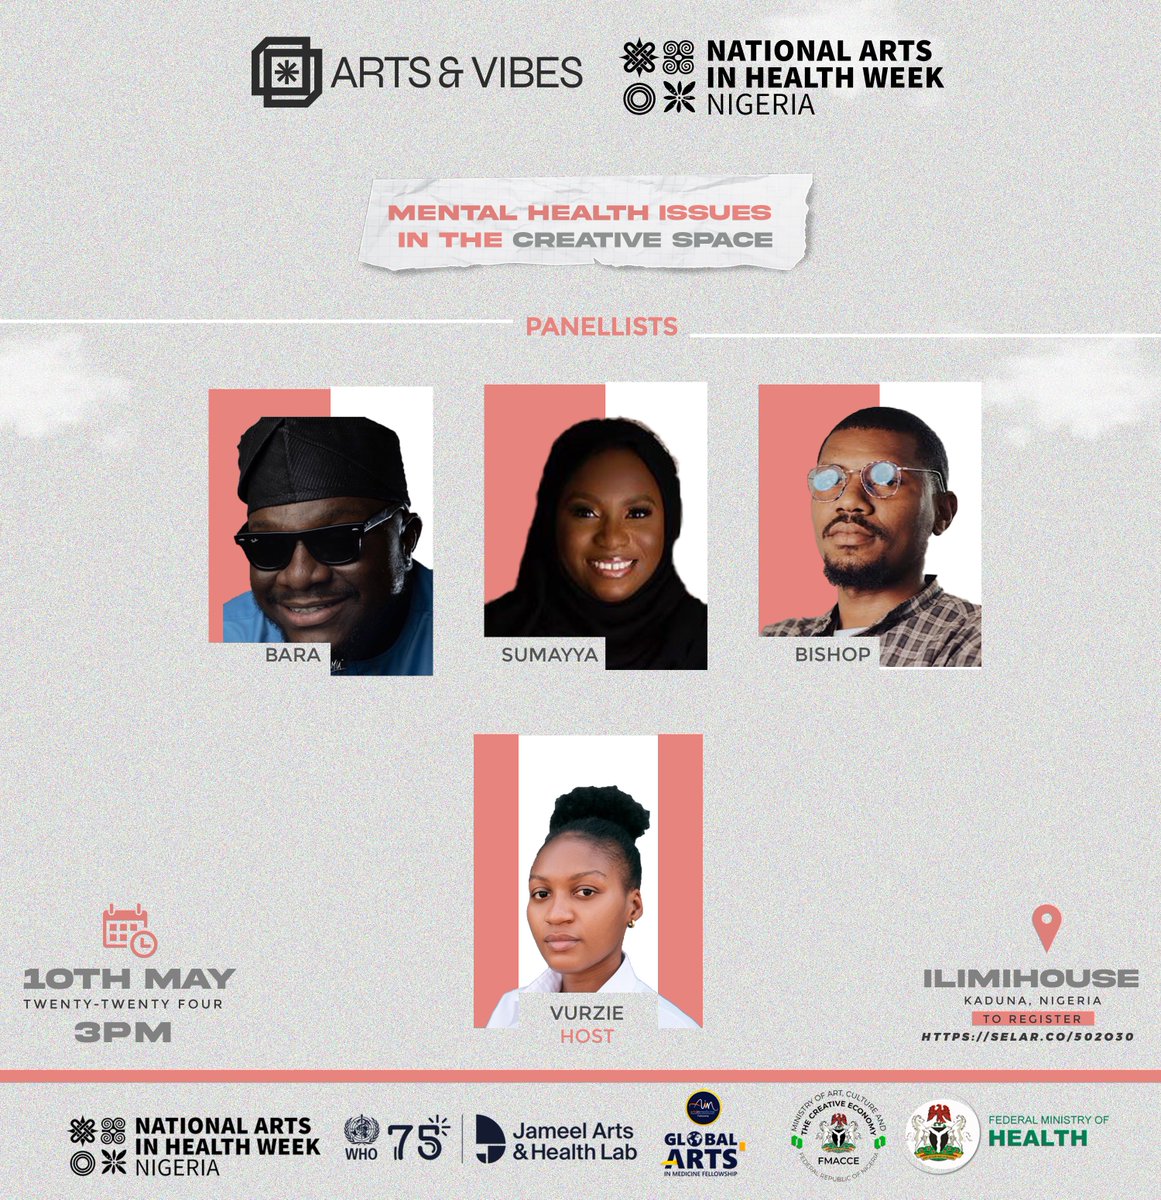 Meet the speakers for our upcoming event in collaboration with the National Arts in Health Week (@NahweekNg) where we'll be talking about 'Mental Health Issues in the Creative Space.'

Save the date. Attendance is absolutely free. Register via this link: selar.co/502o30